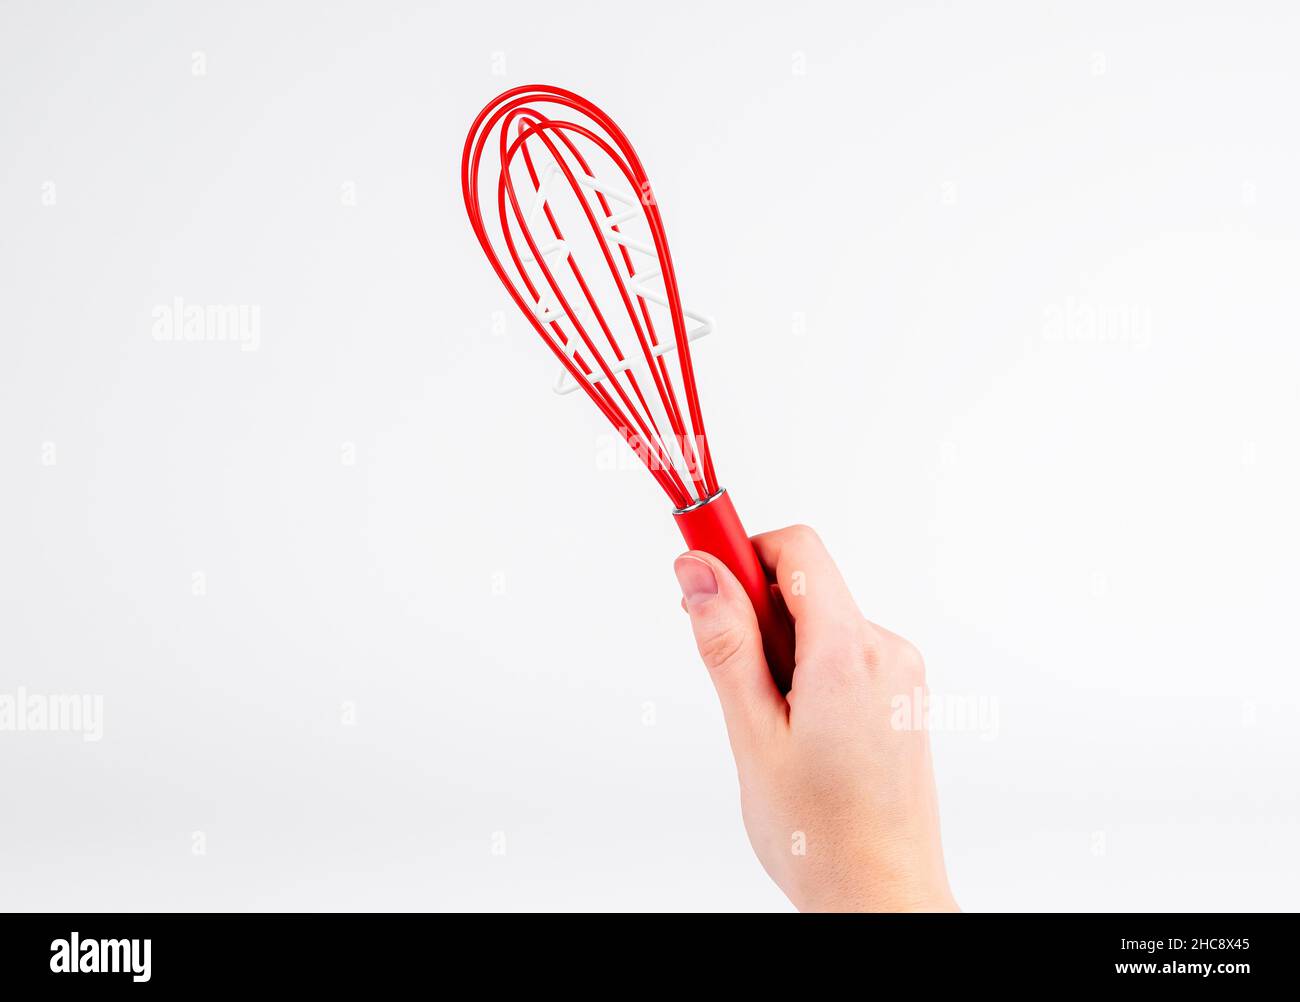 https://c8.alamy.com/comp/2HC8X45/red-whisk-tool-in-hand-over-white-background-whipping-beater-for-holidays-with-christas-tree-inside-2HC8X45.jpg